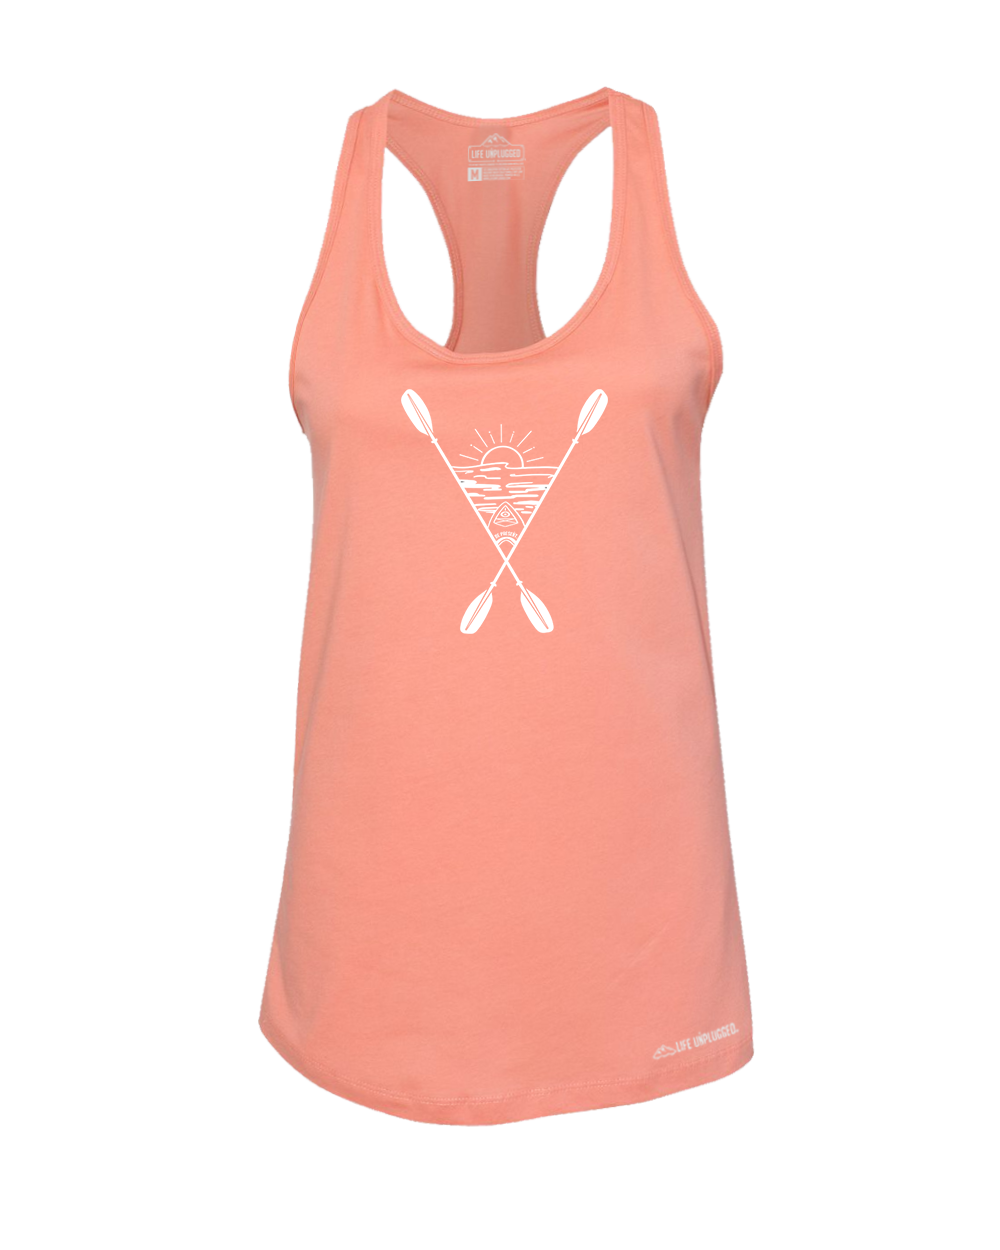 Kayaking Into The Sunset Premium Women's Relaxed Fit Racerback Tank Top - Life Unplugged